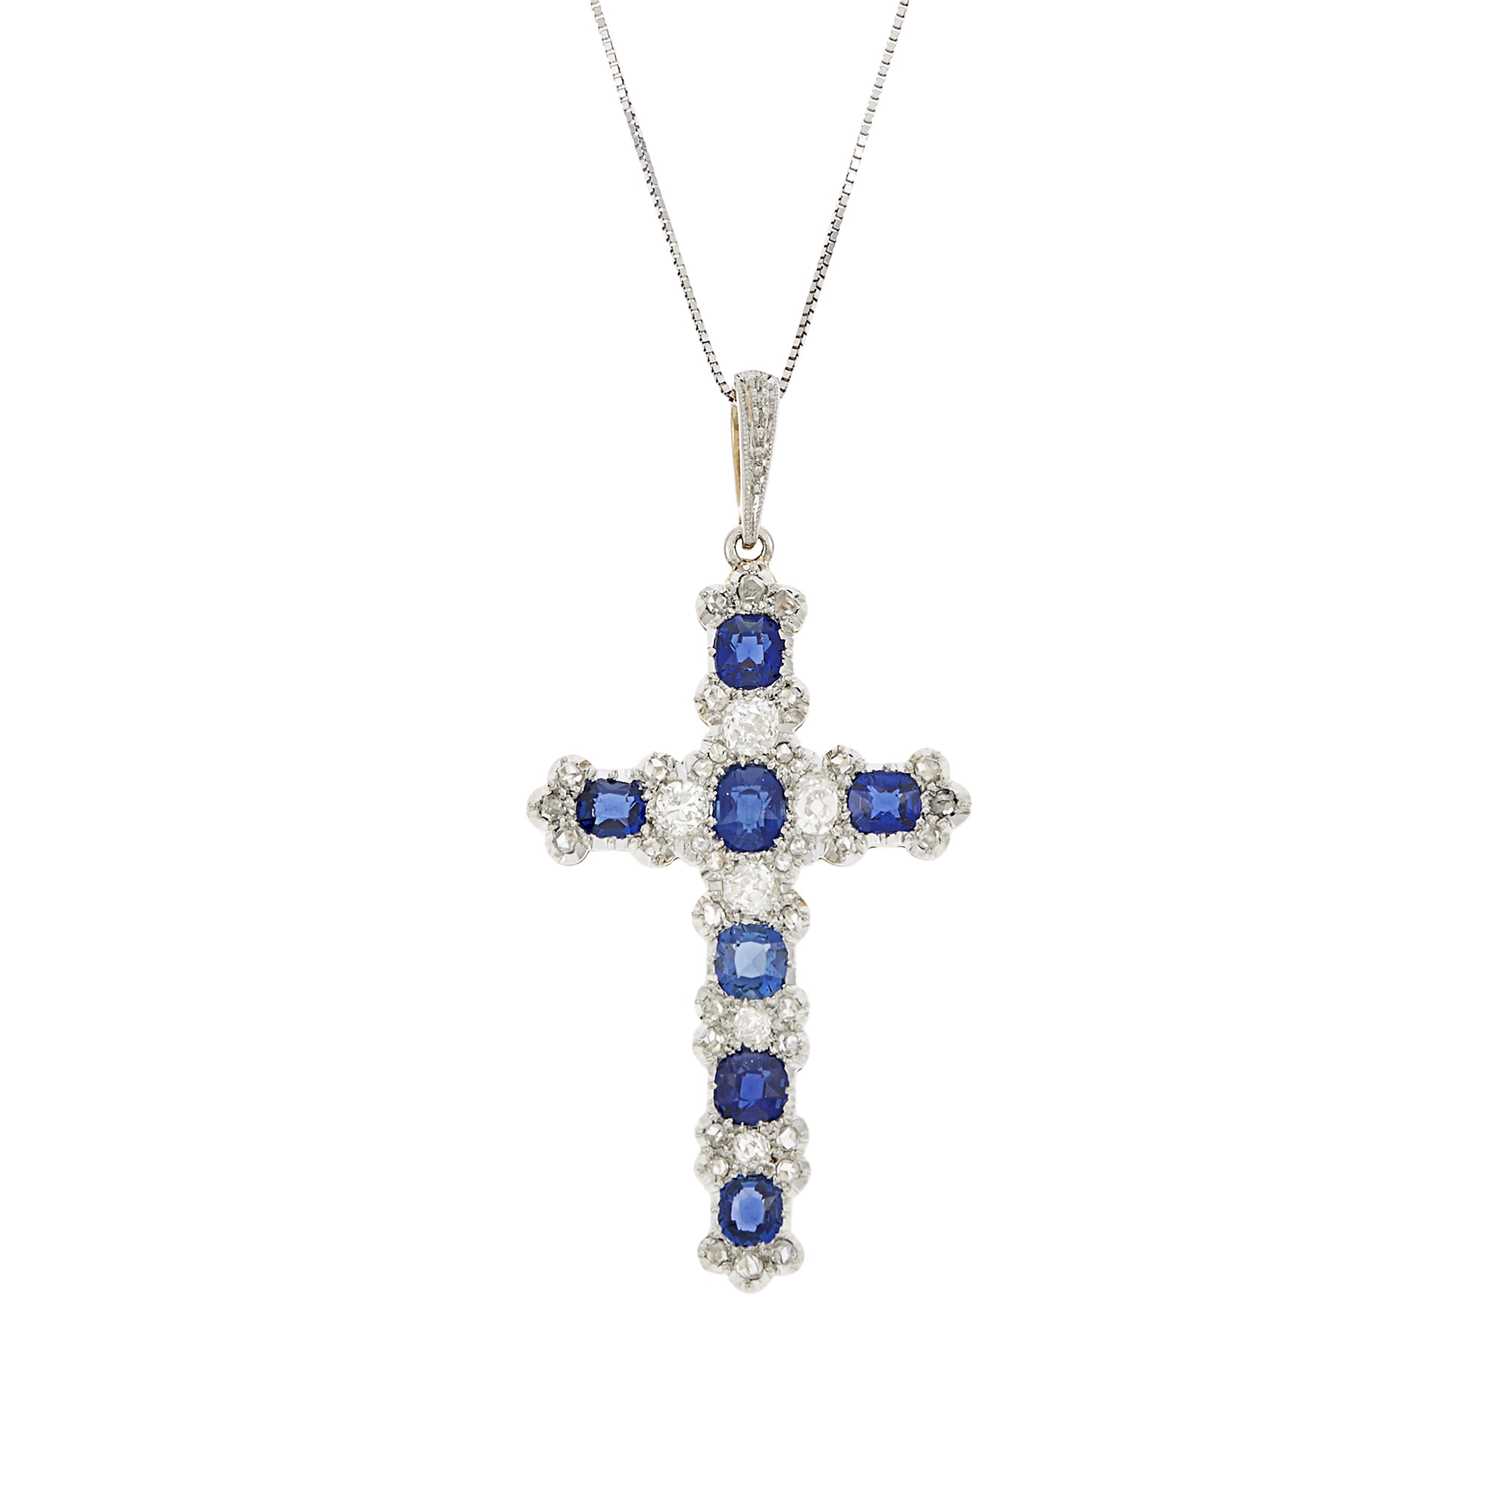 Lot 1169 - Edwardian Platinum, Gold, Sapphire and Diamond Cross Pendant with White Gold Chain Necklace